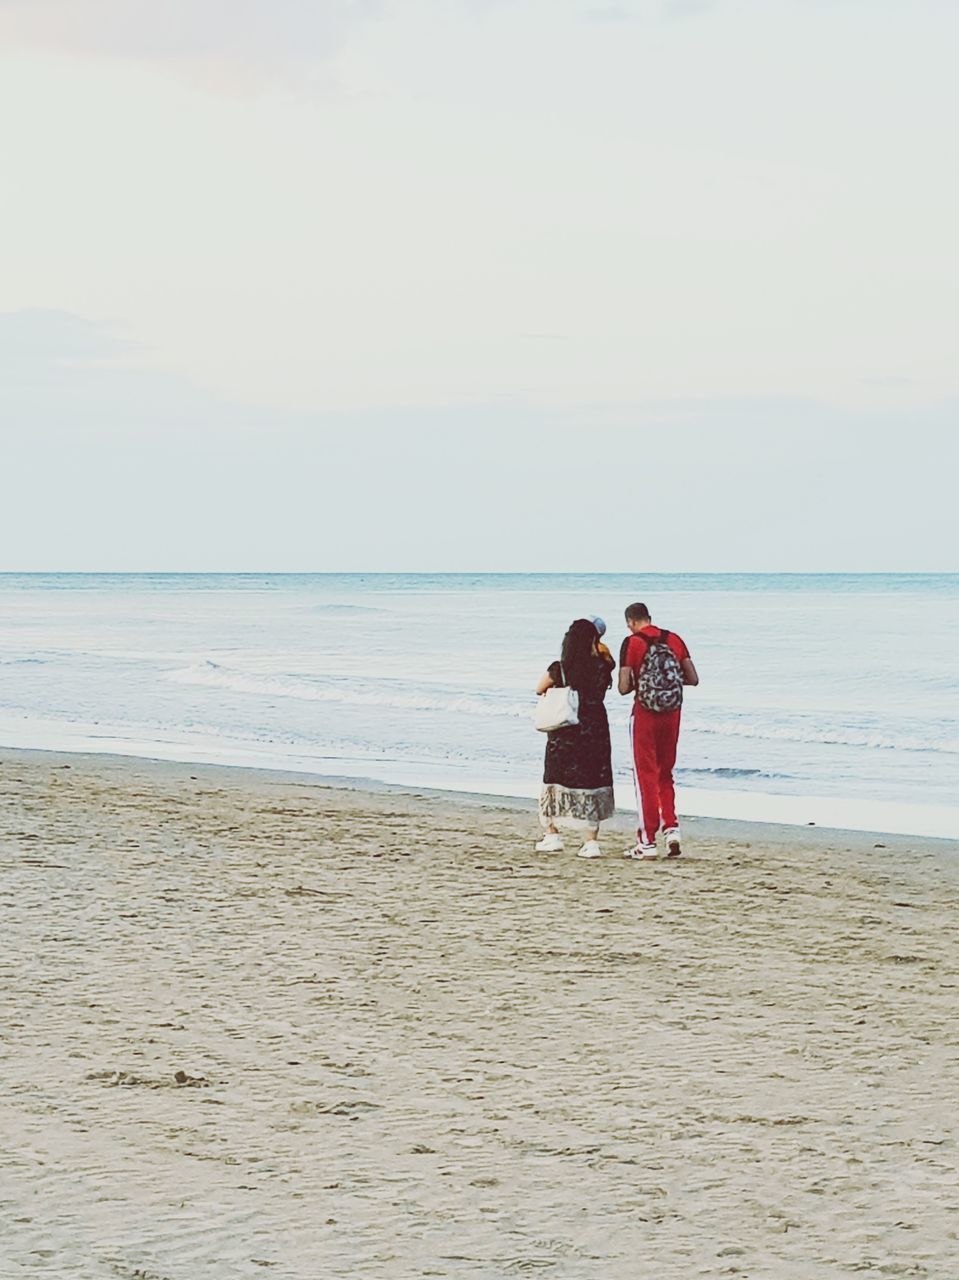 REAR VIEW OF COUPLE ON BEACH AGAINST SEA